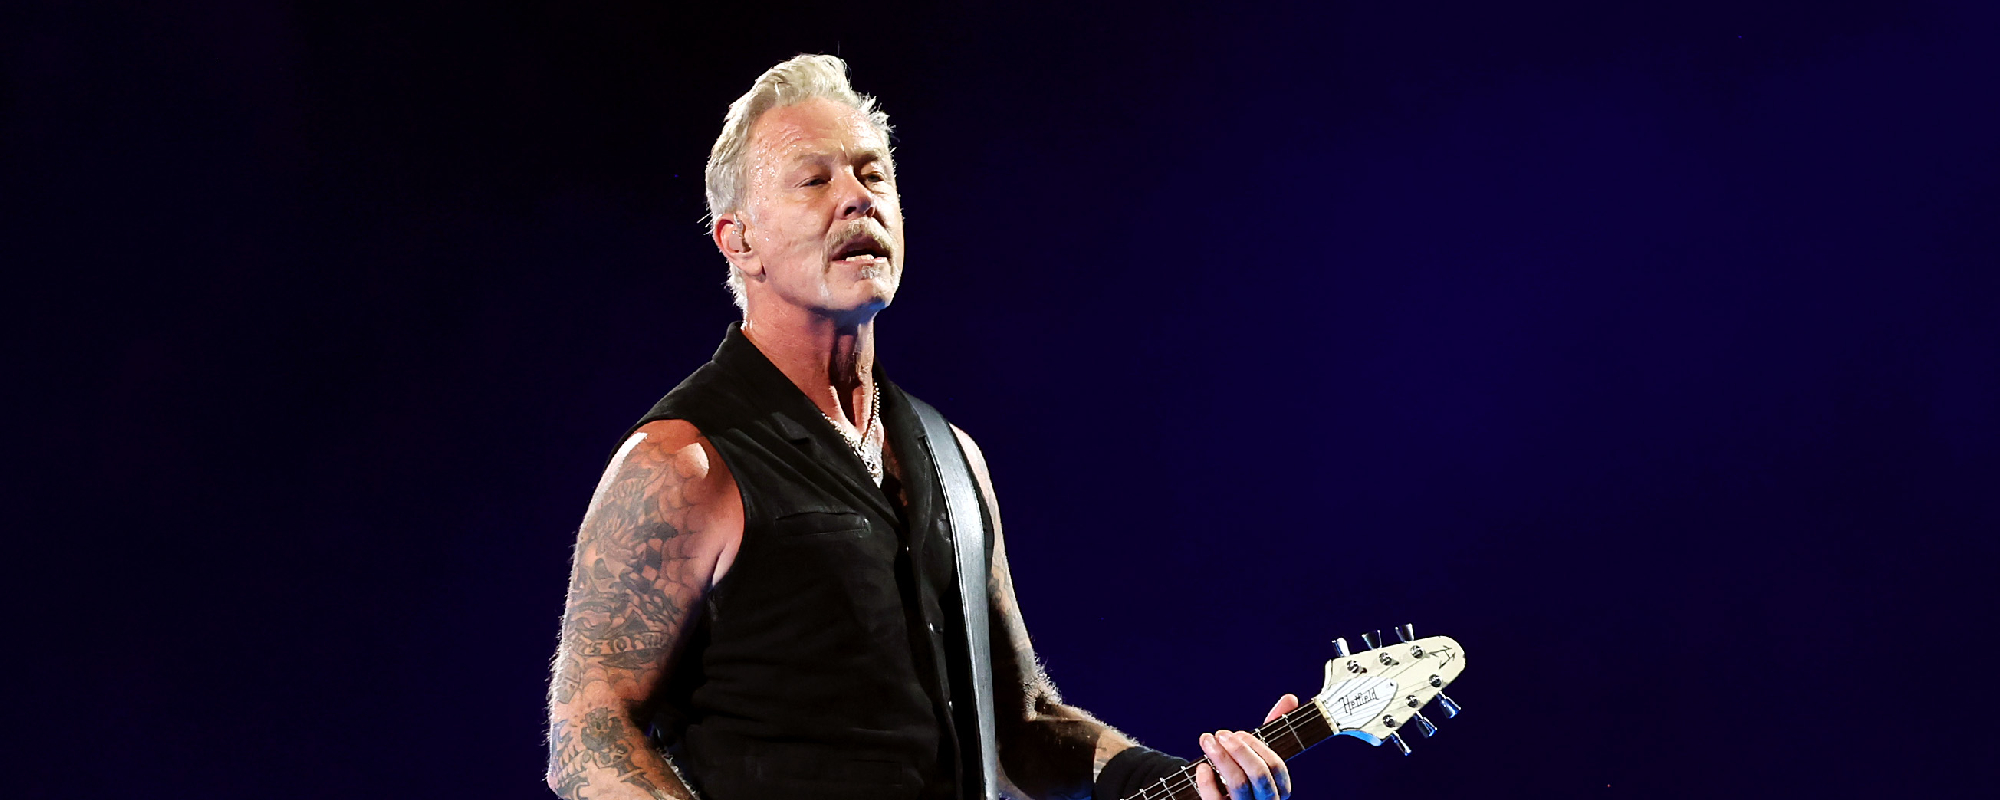 James Hetfield Discusses His Love for Cigars and Breaking the Rules